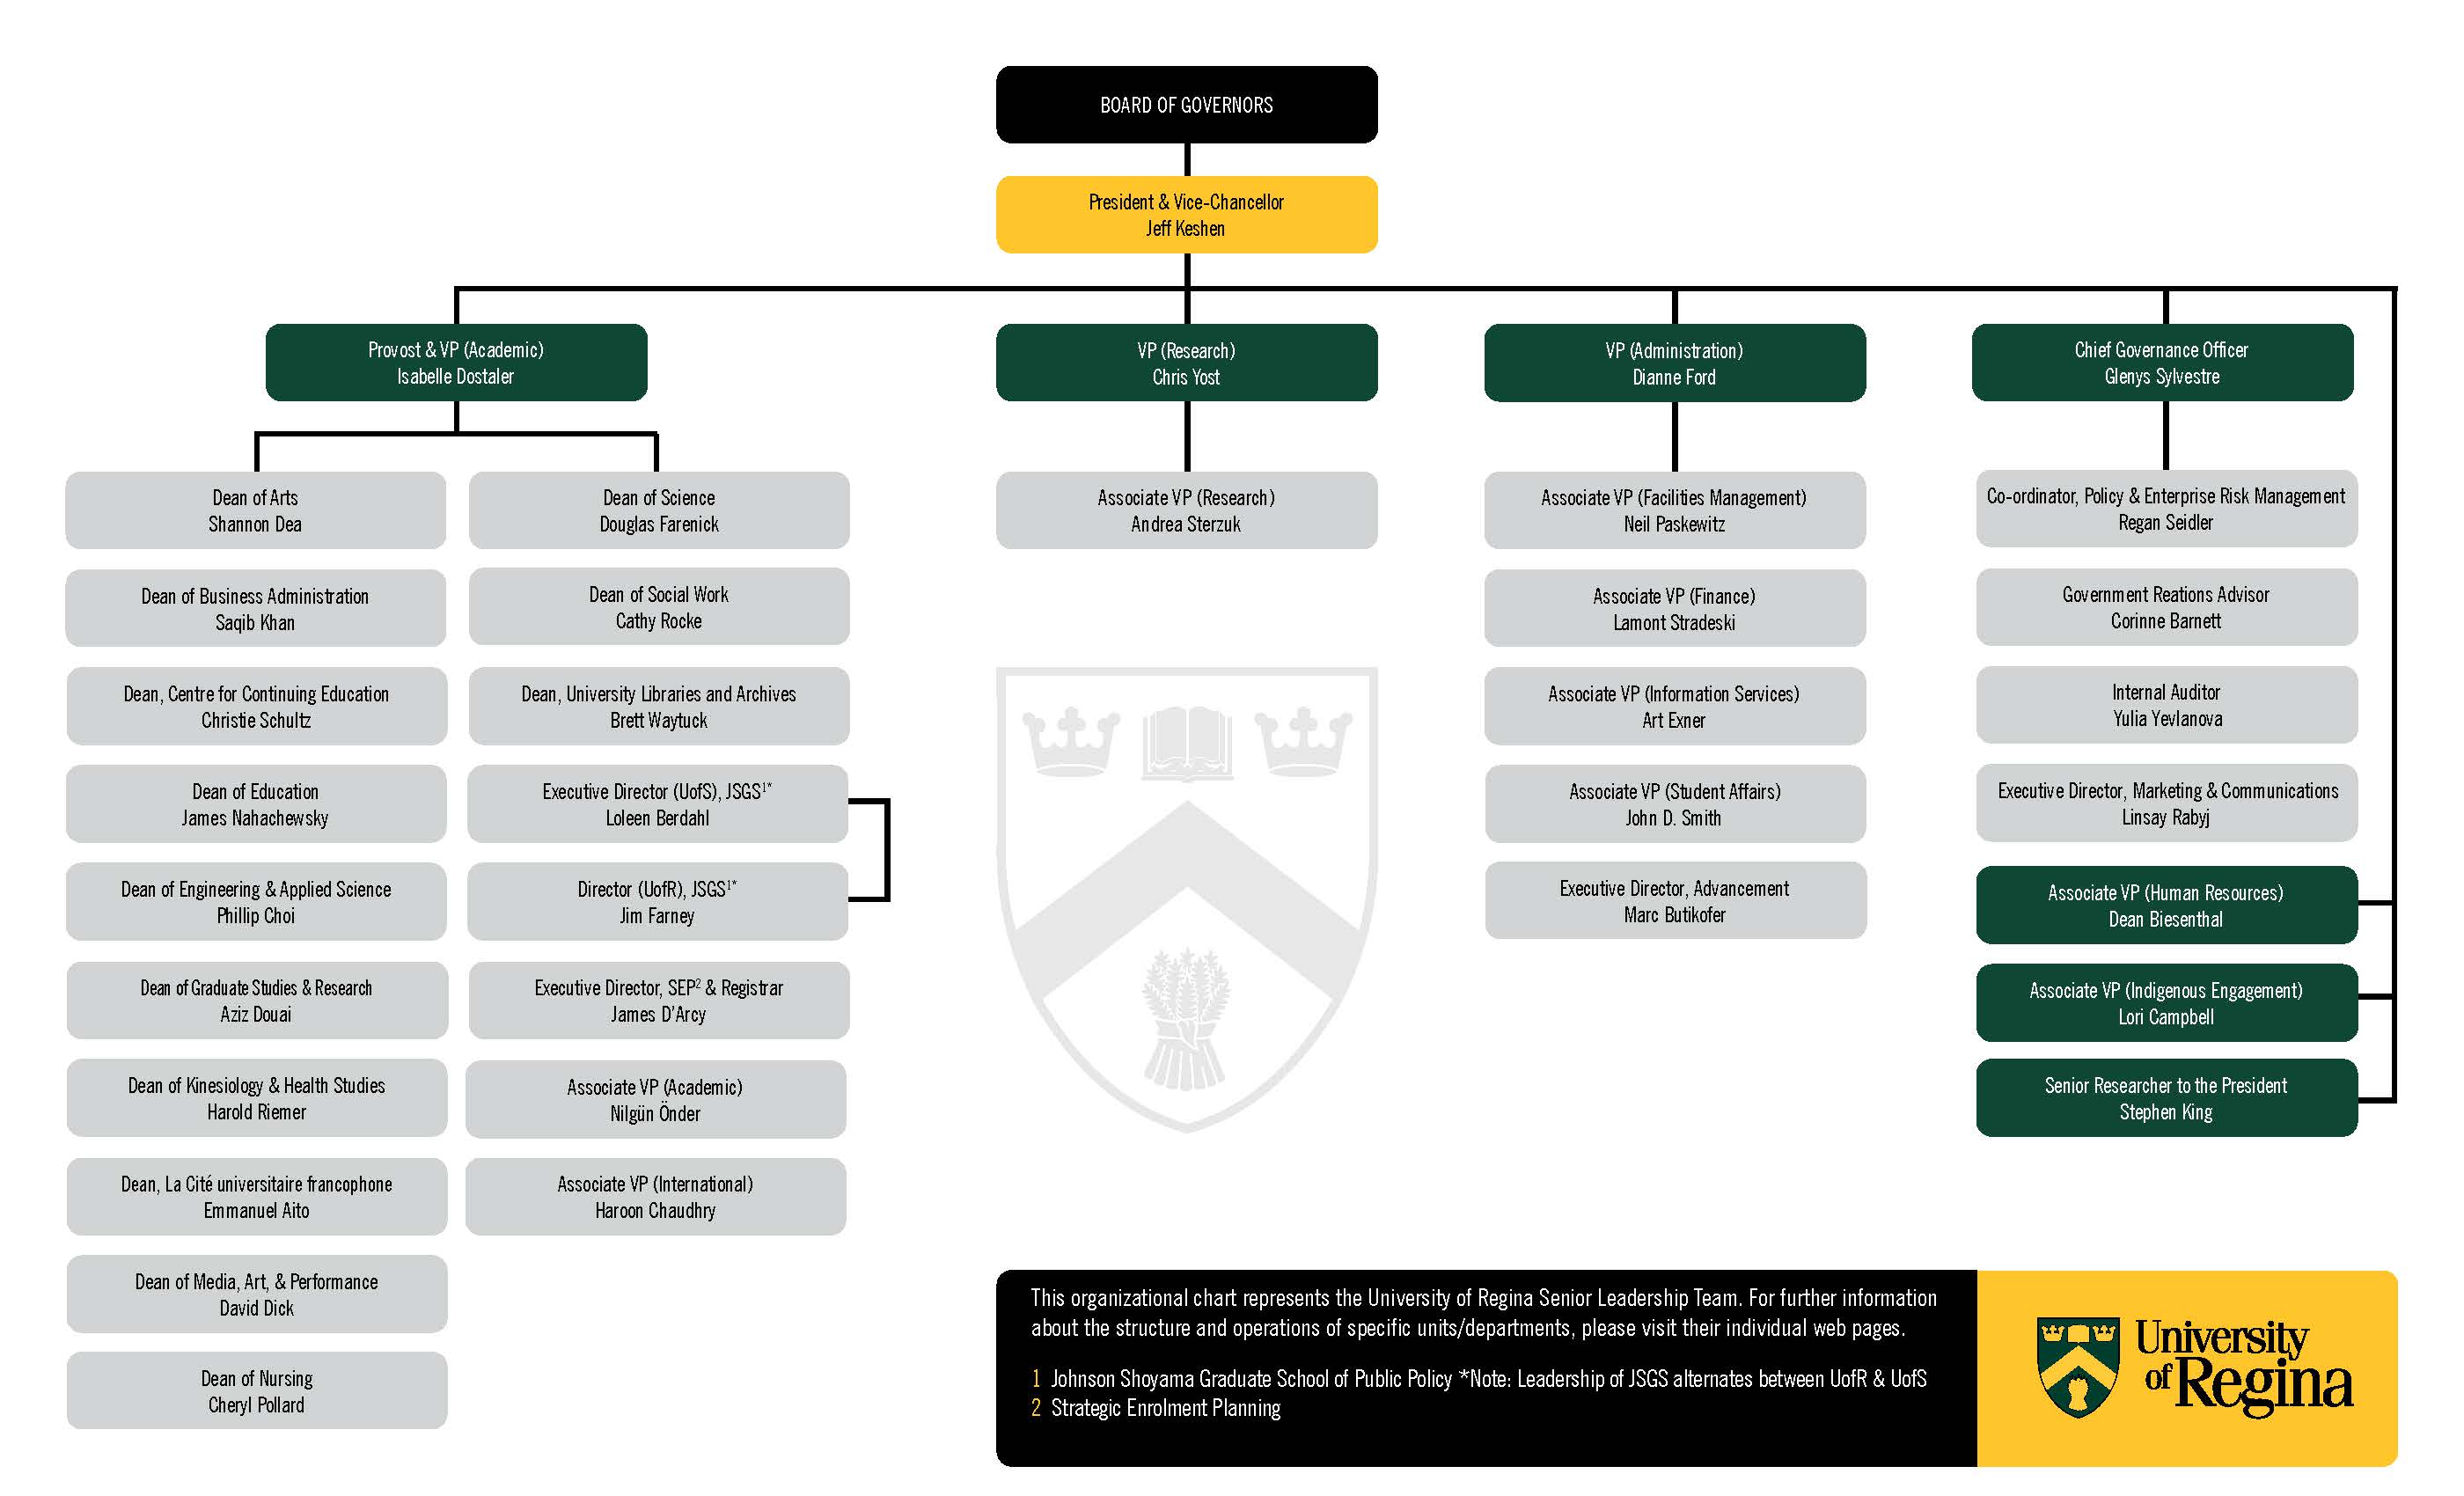 slt org chart for the UofR